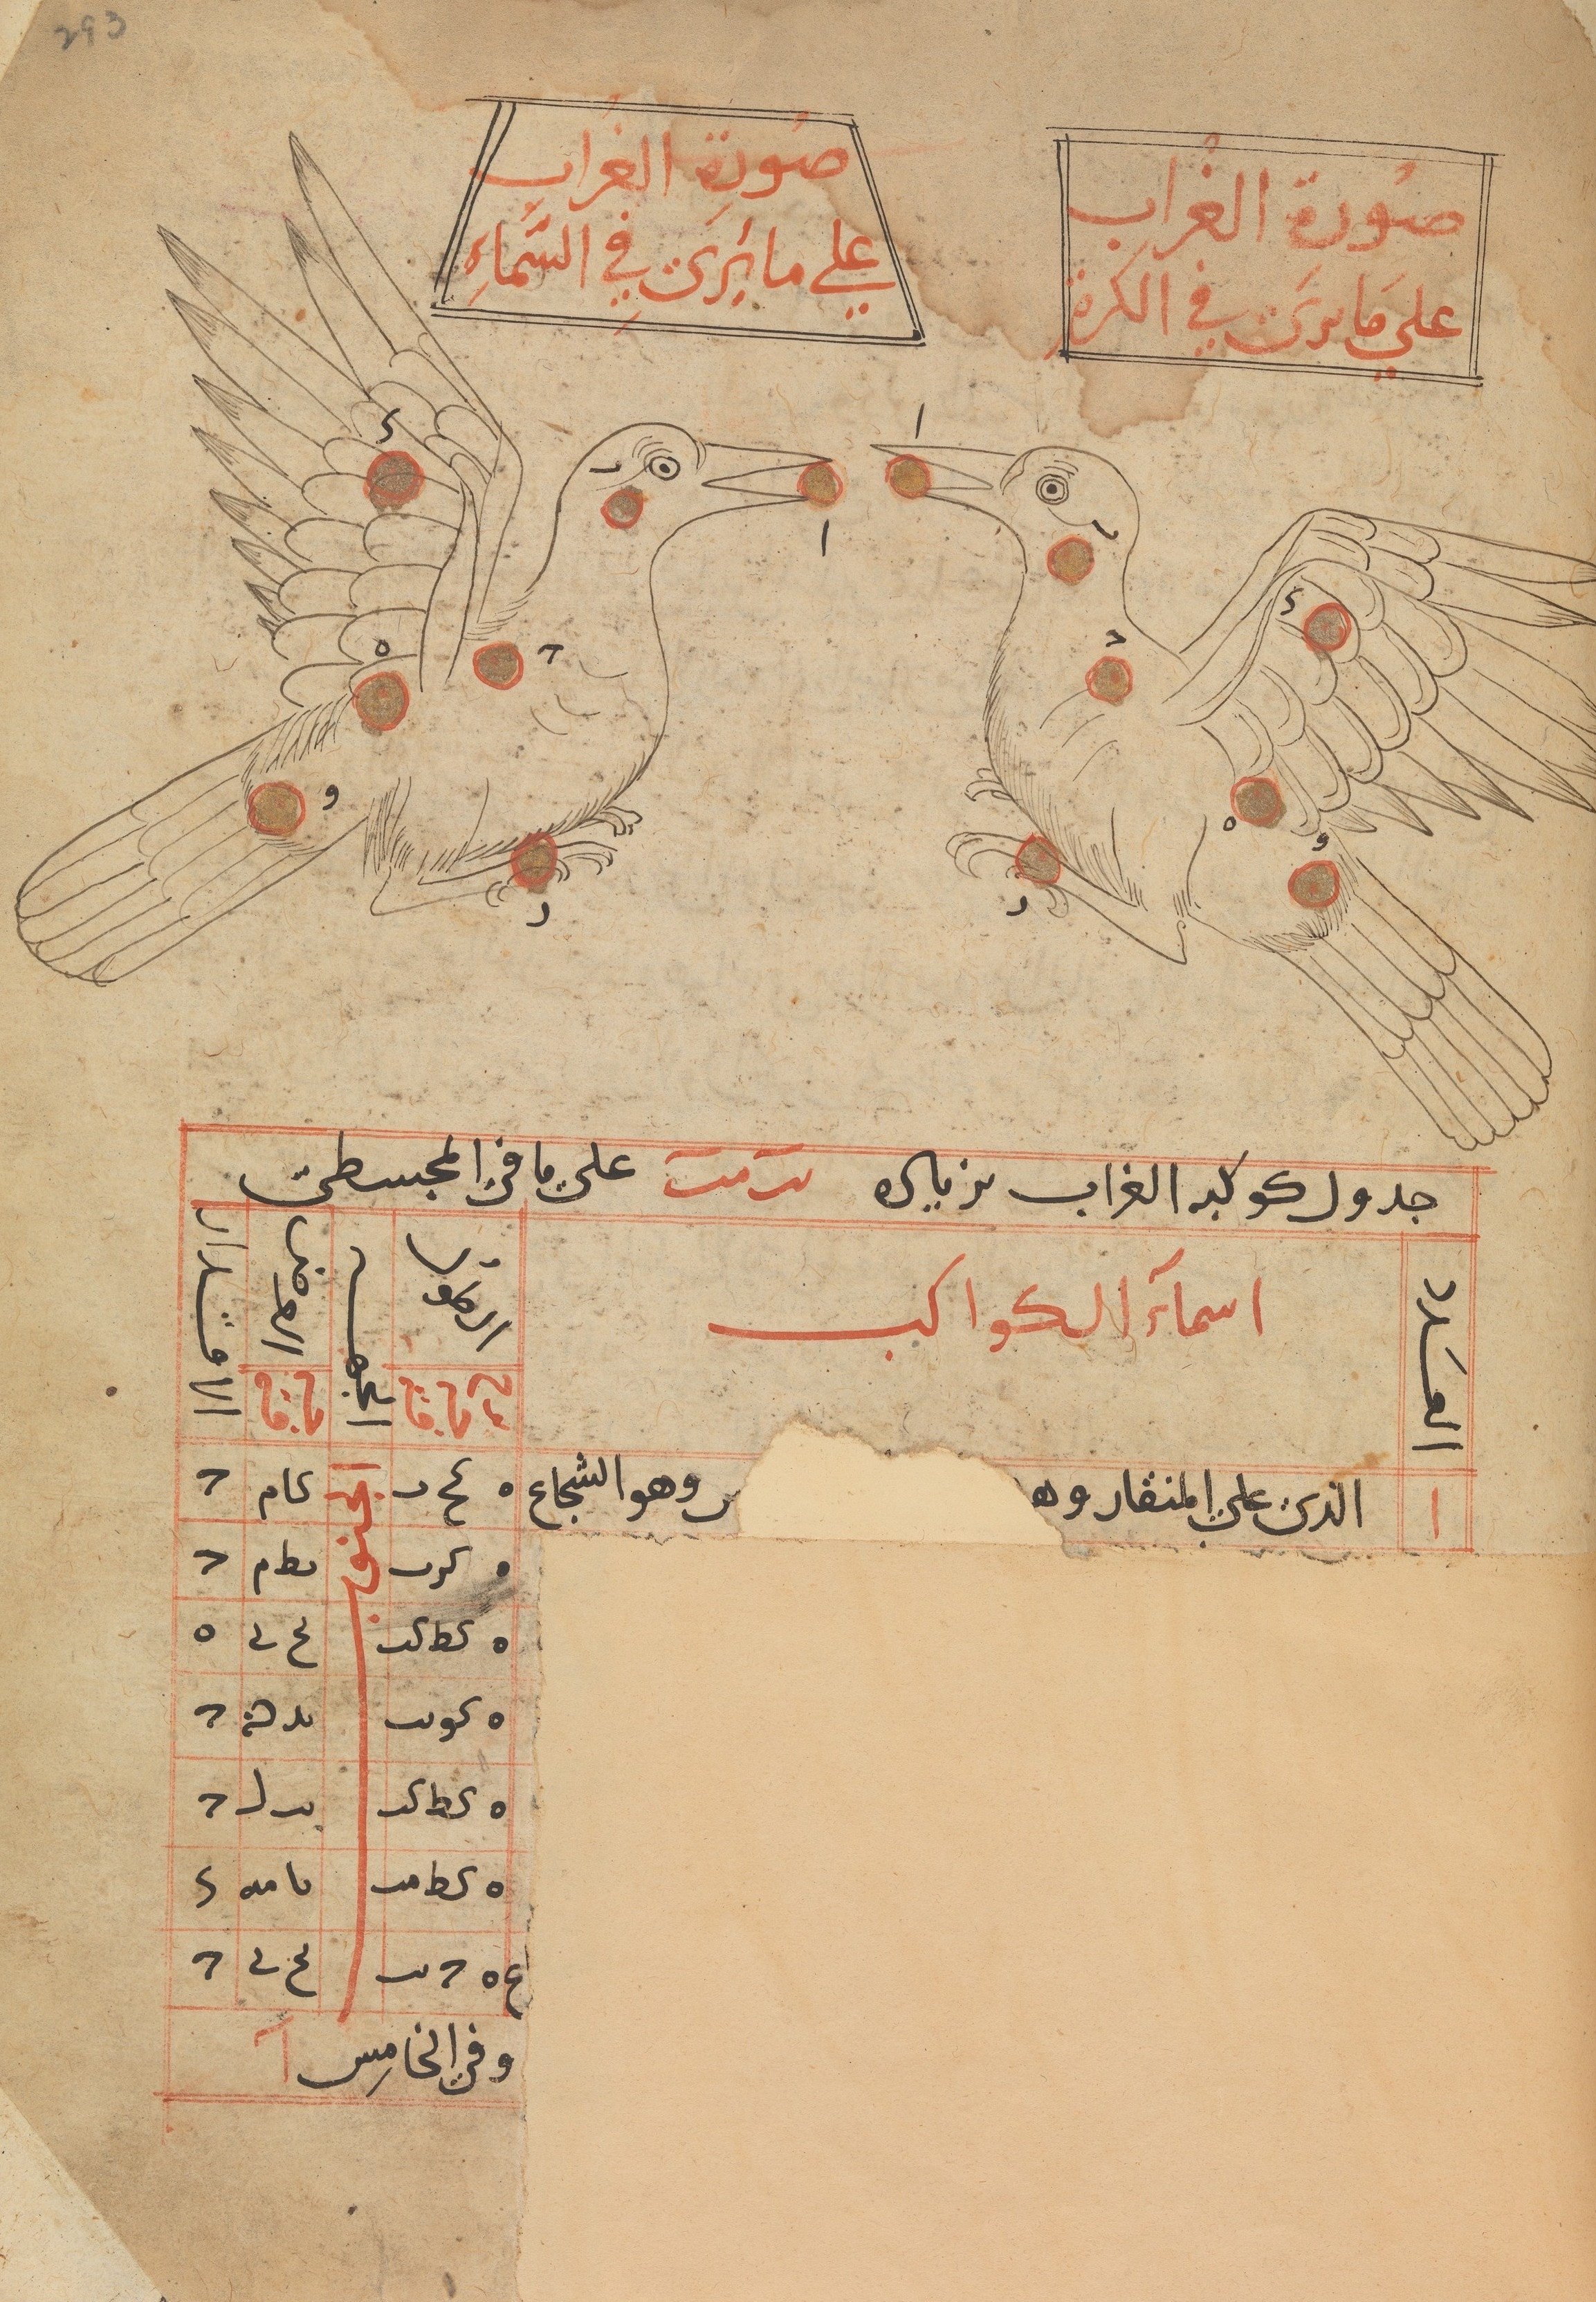 Constellation Illustration of two birds with Arabic writing